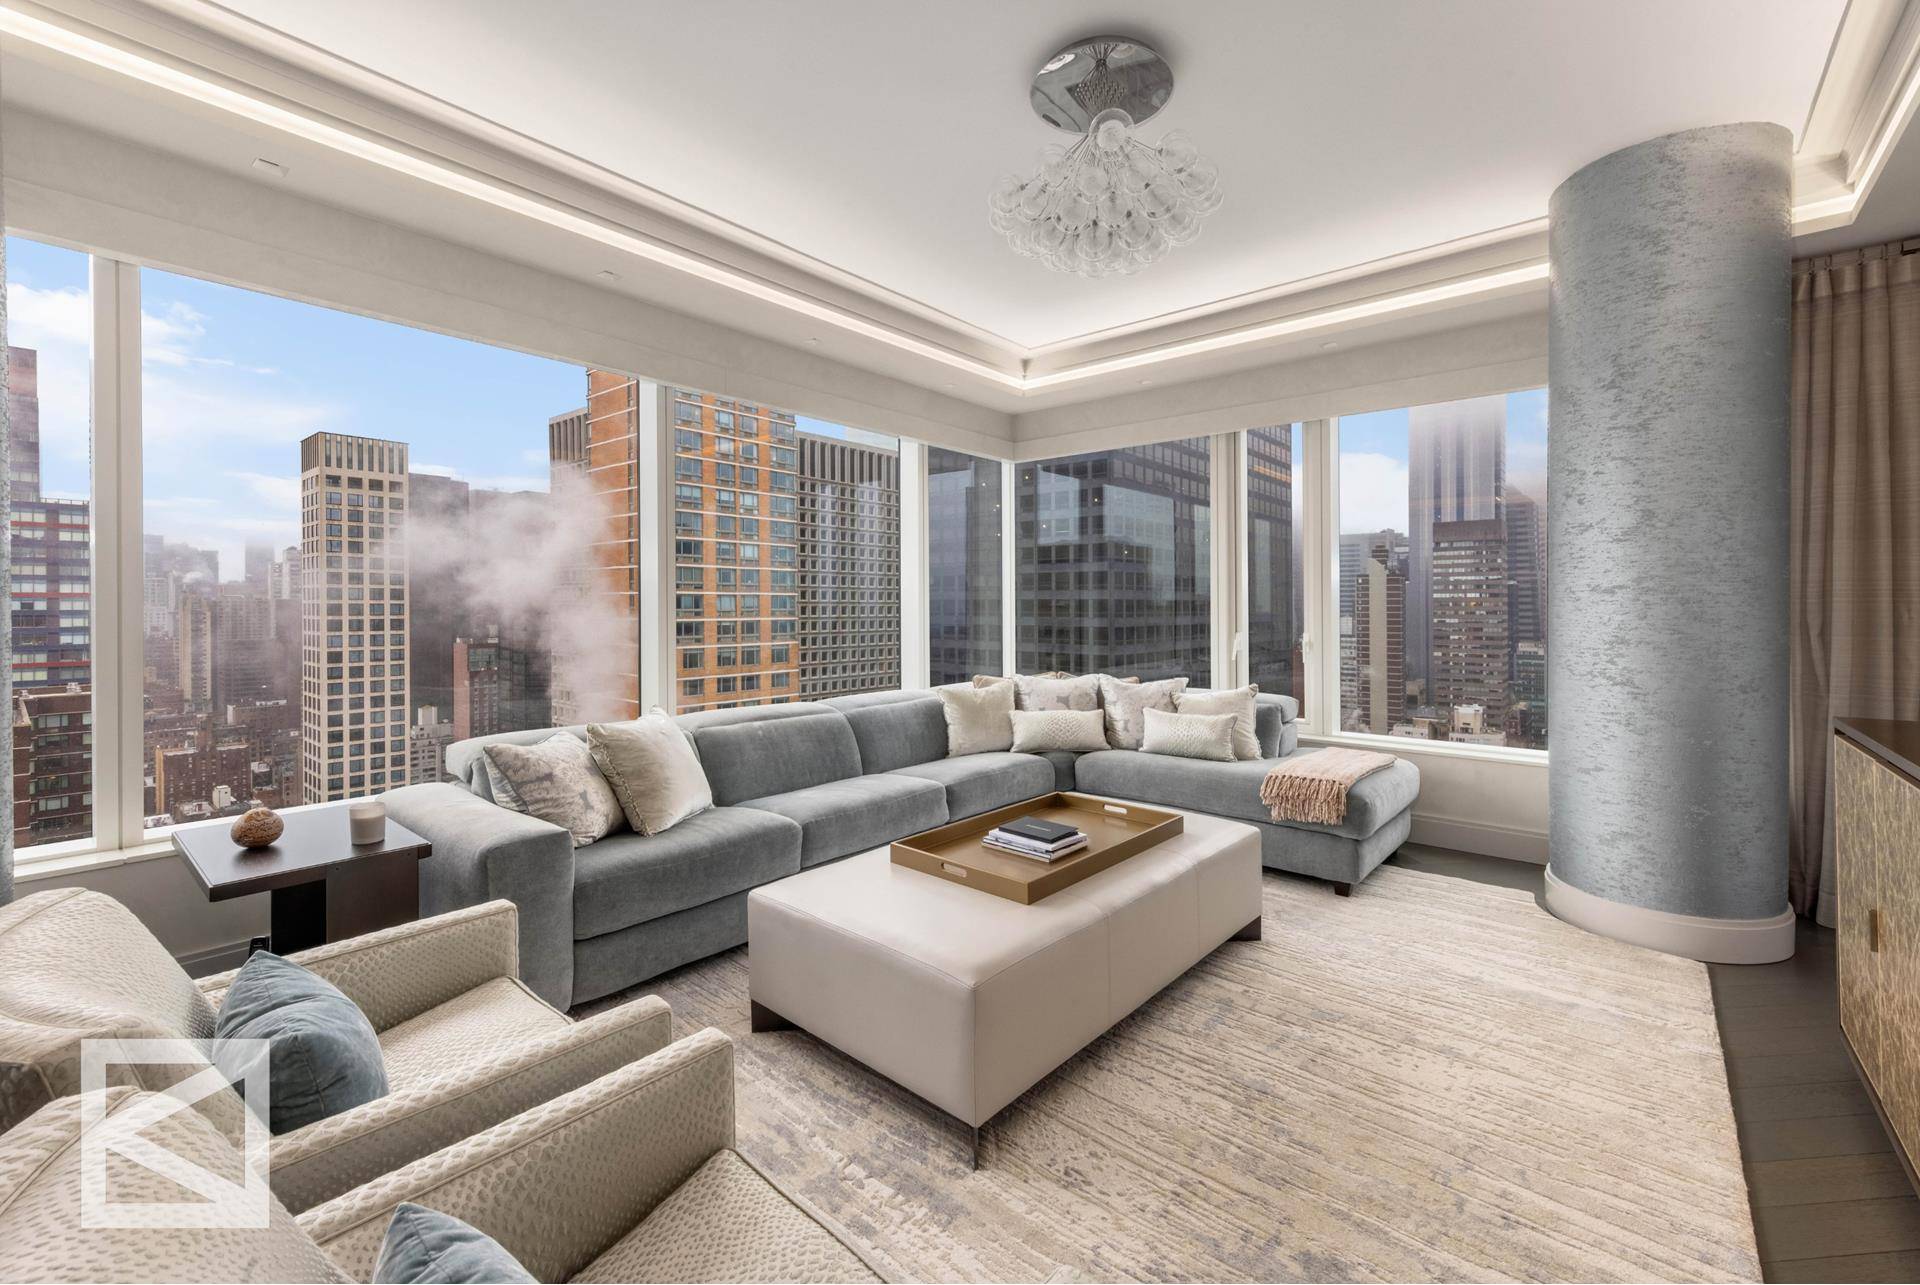 Designed by RGR Interior Architecture, Andres Guzman's vision elevates 252 East 57th Street to new heights.